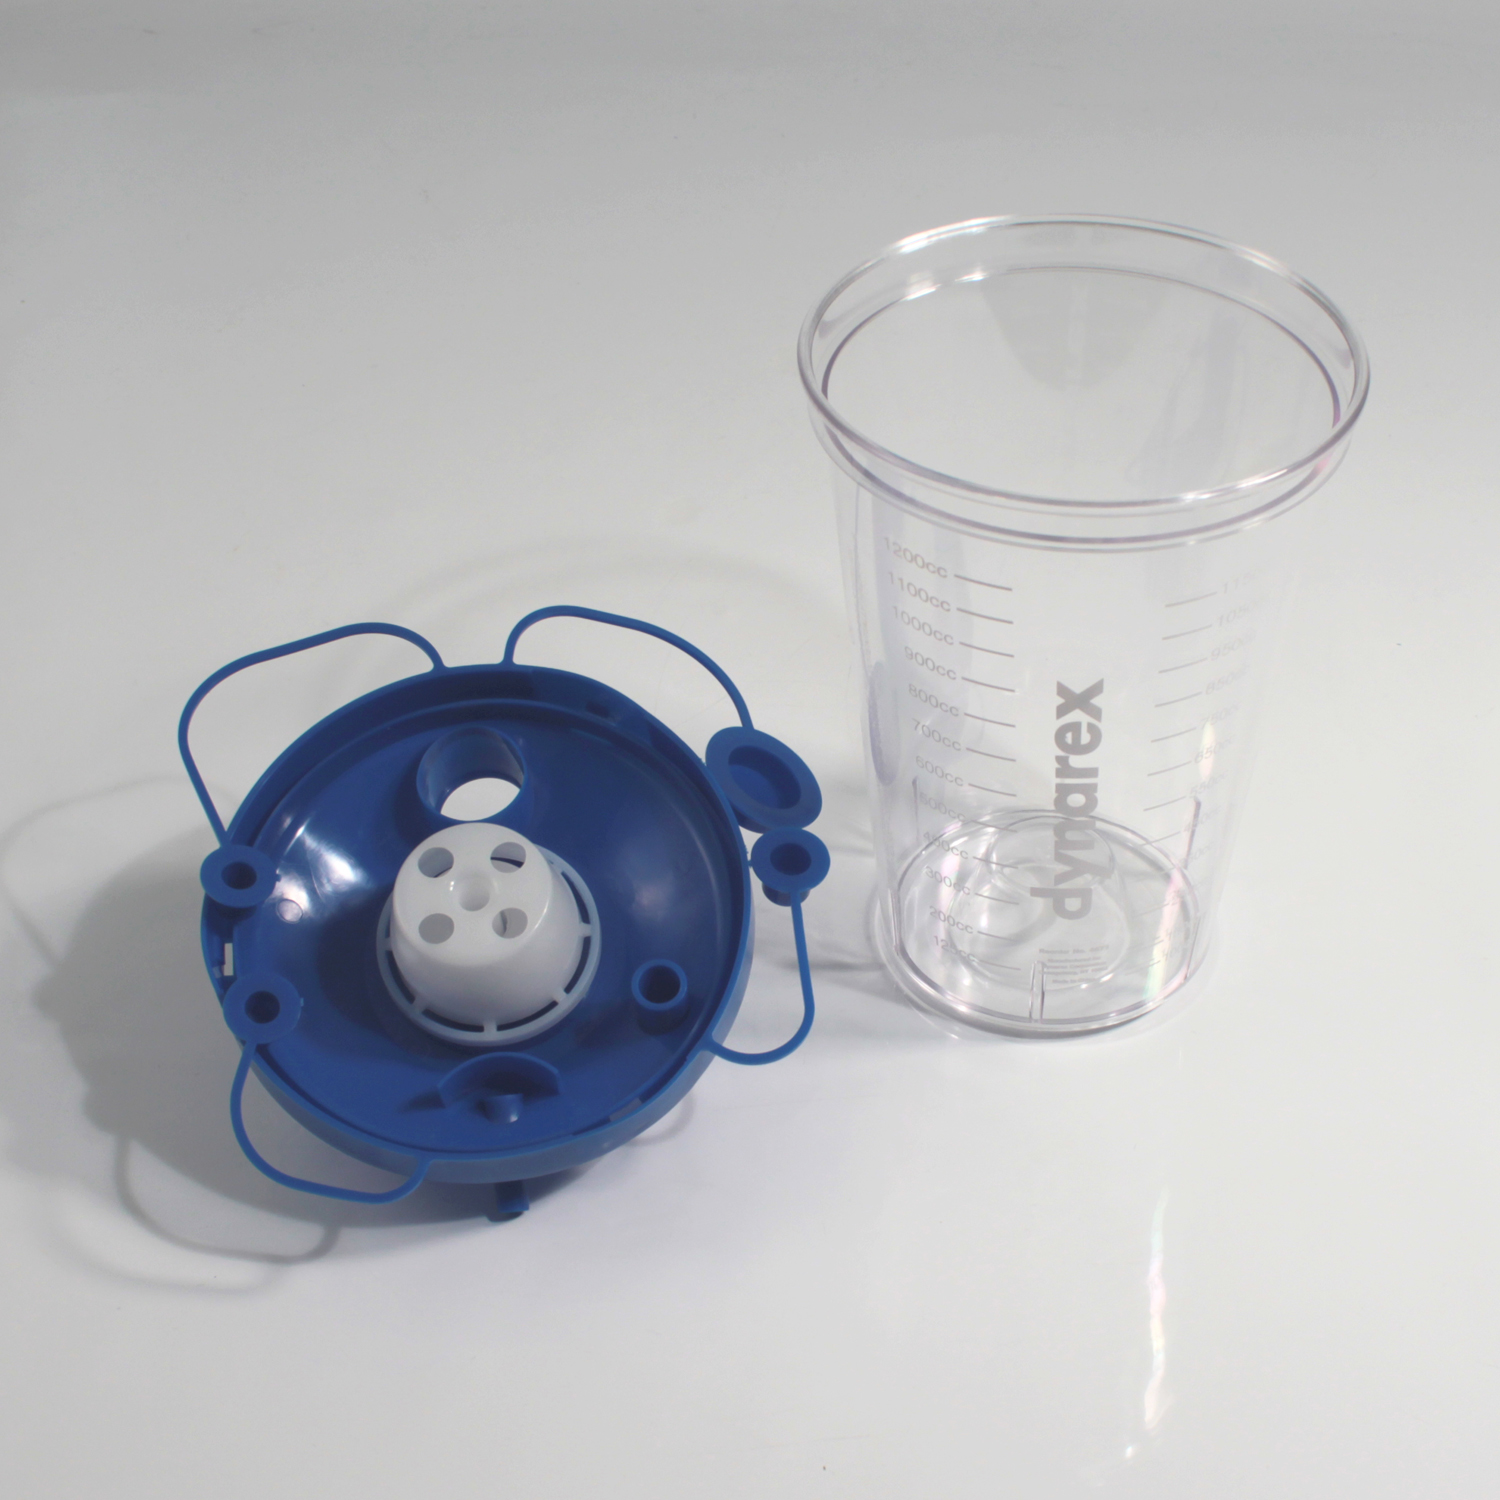 1200cc Suction Canister (Hi-flow) with Lid